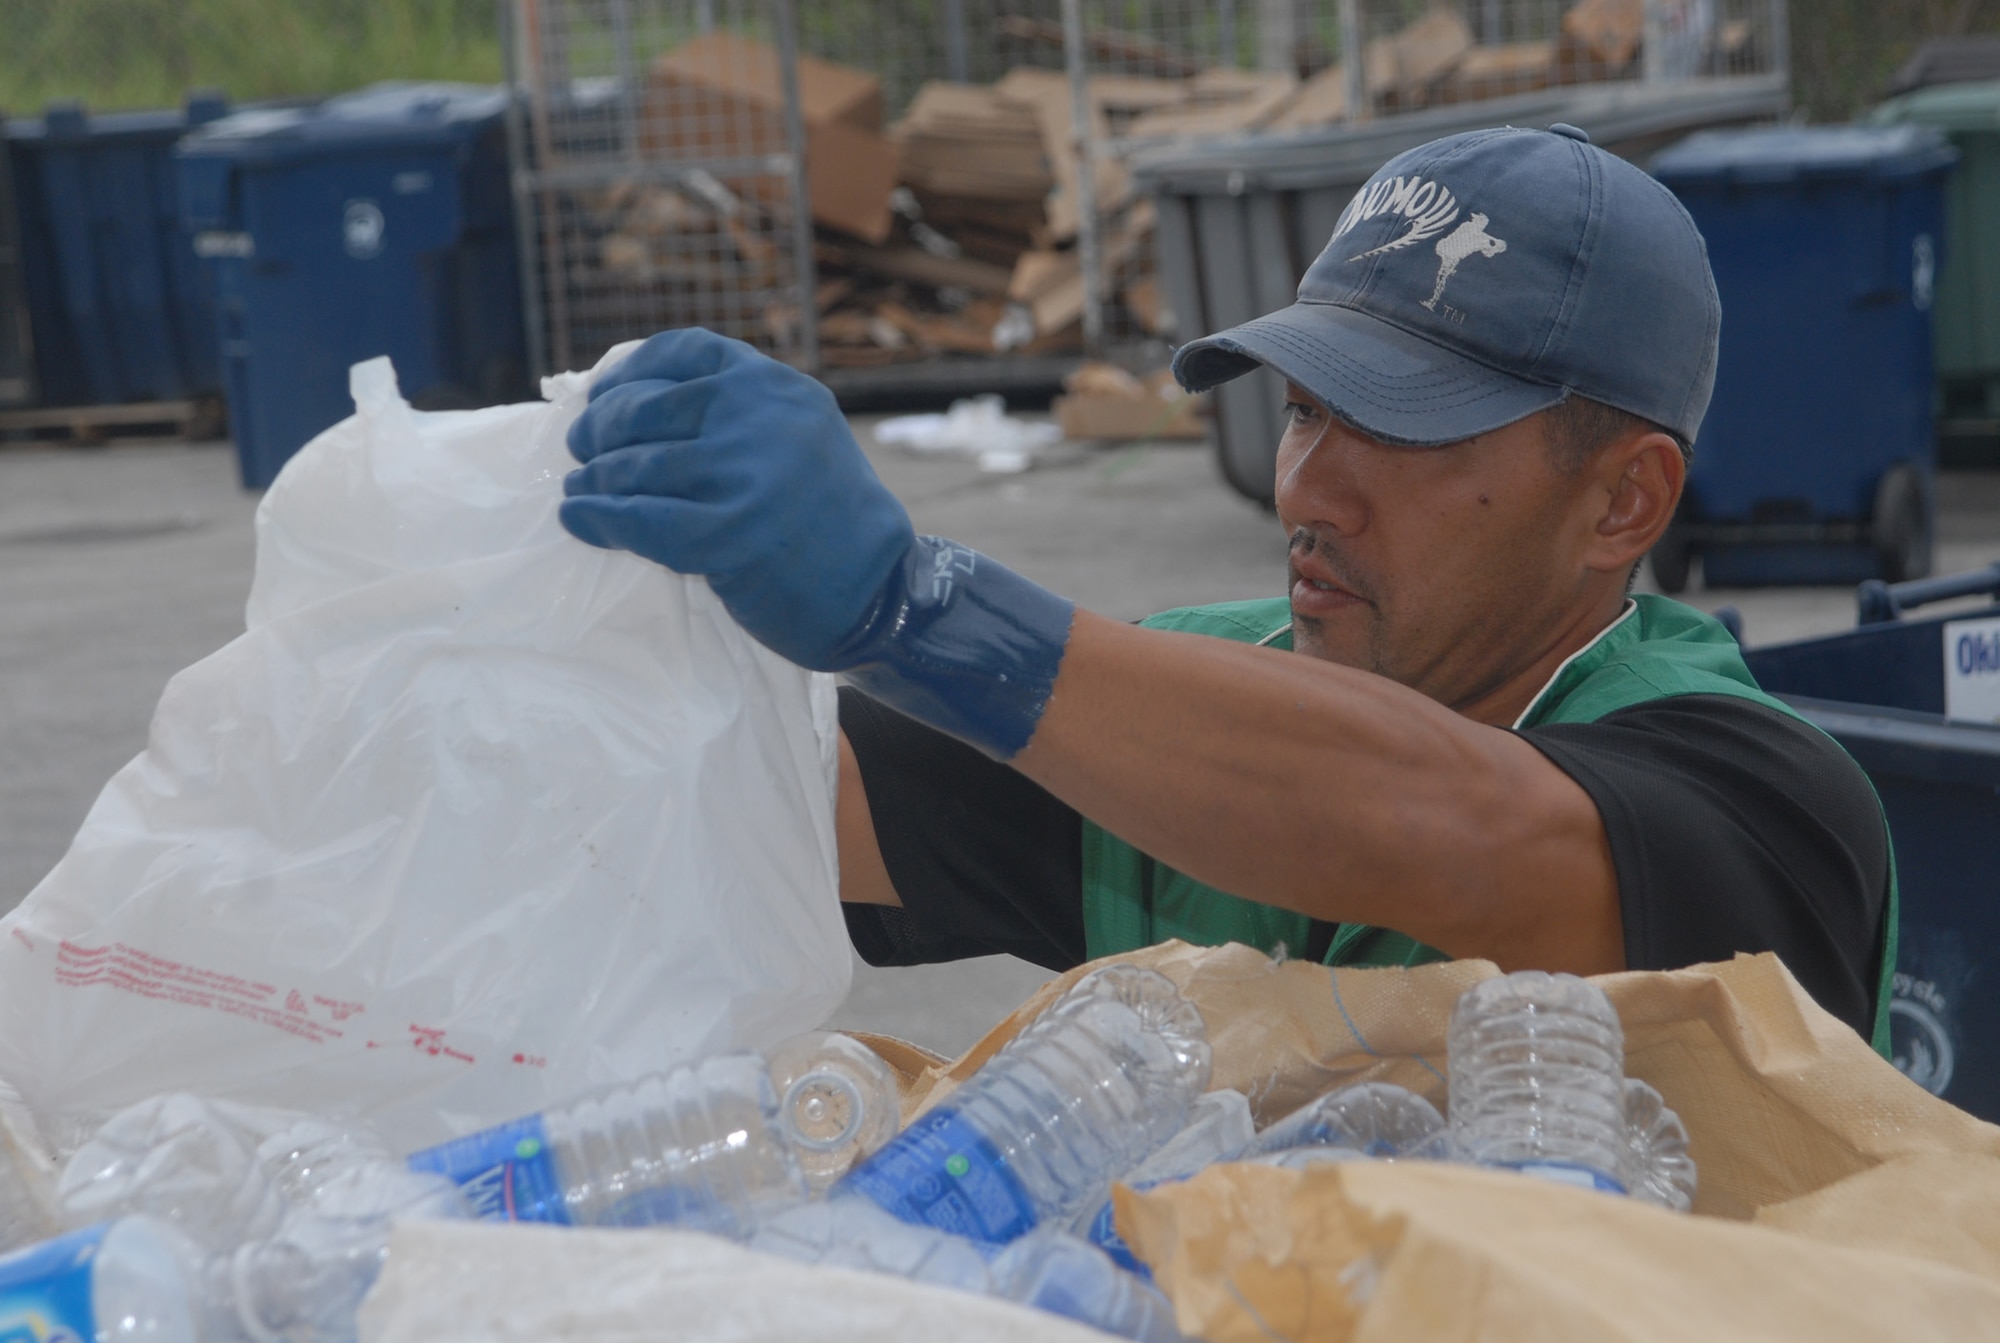 Leo Yozak, with Kadena’s recycling center, works to separate plastic bottles from a large shipment of recycling materials Jan. 16. The center accepts plastic, Styrofoam, glass, aluminum and other materials from Kadena Air Base for the wing recycling program. (U.S. Air Force photo/Staff Sgt. Christopher Marasky)